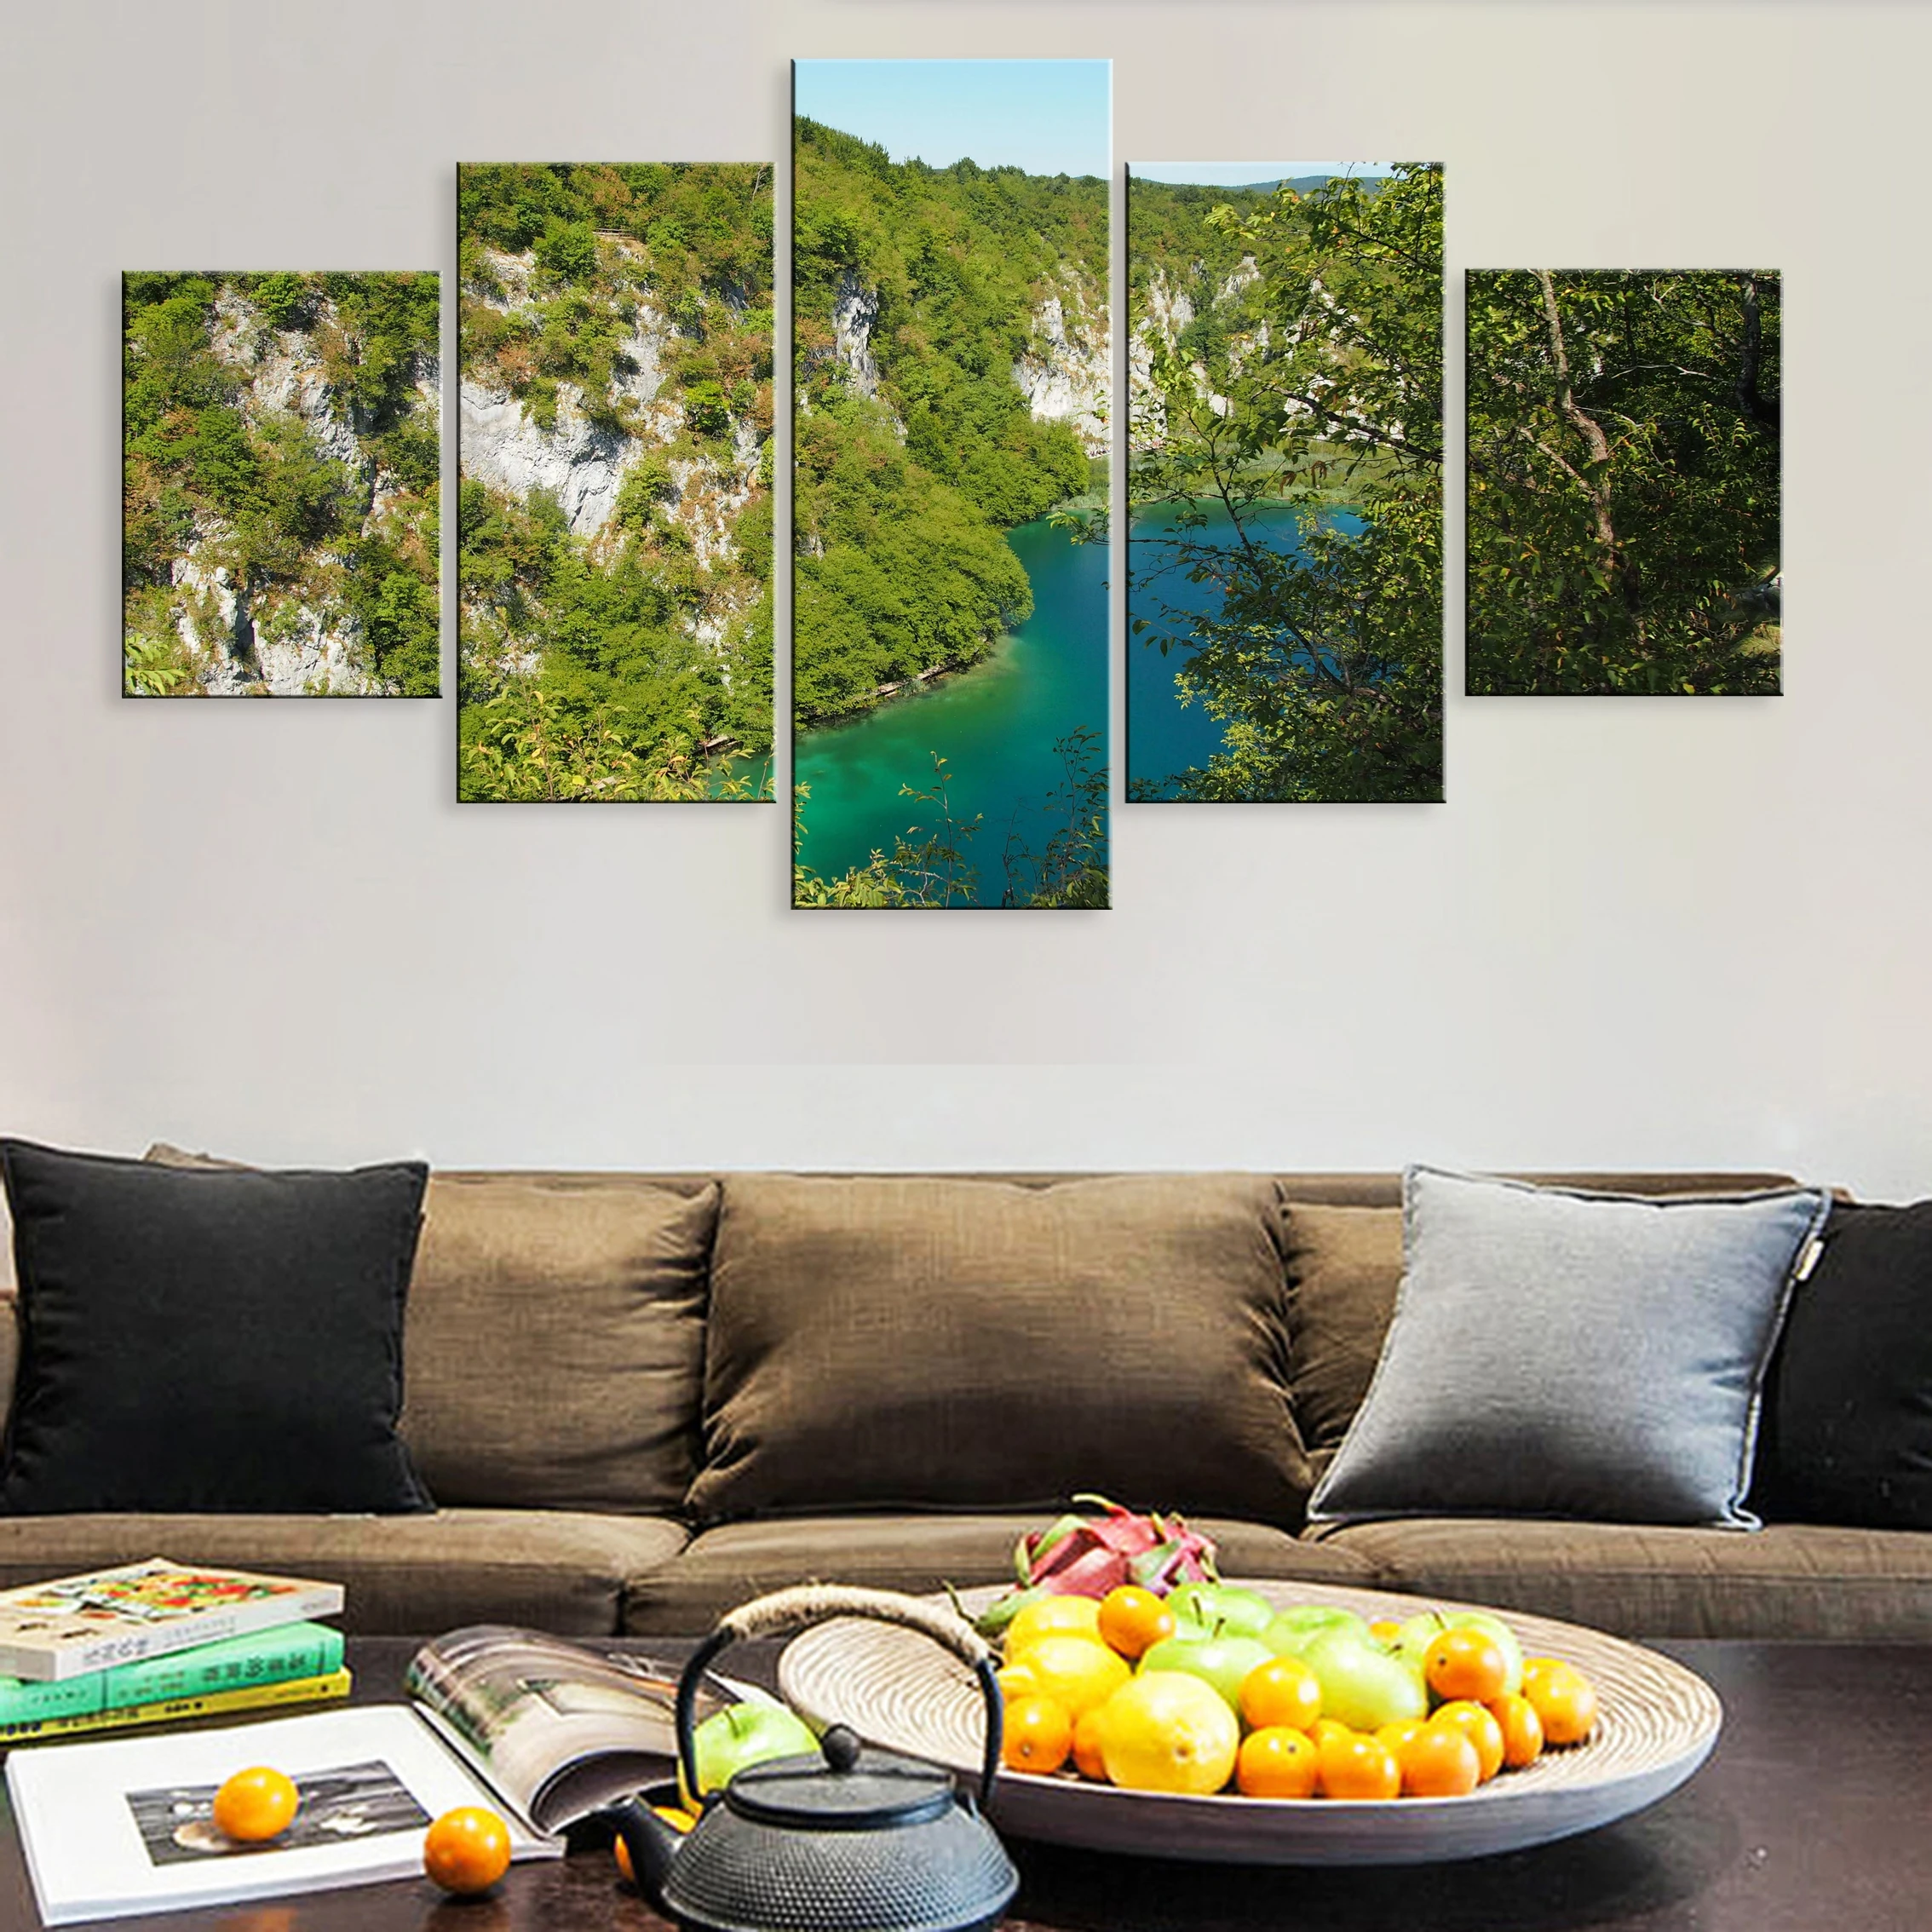 

Hd 5 Pieces Artwork Poster Canvas Home Framework Landscape Beautiful Scenery Lake Forest Plitvice Lakes National Park